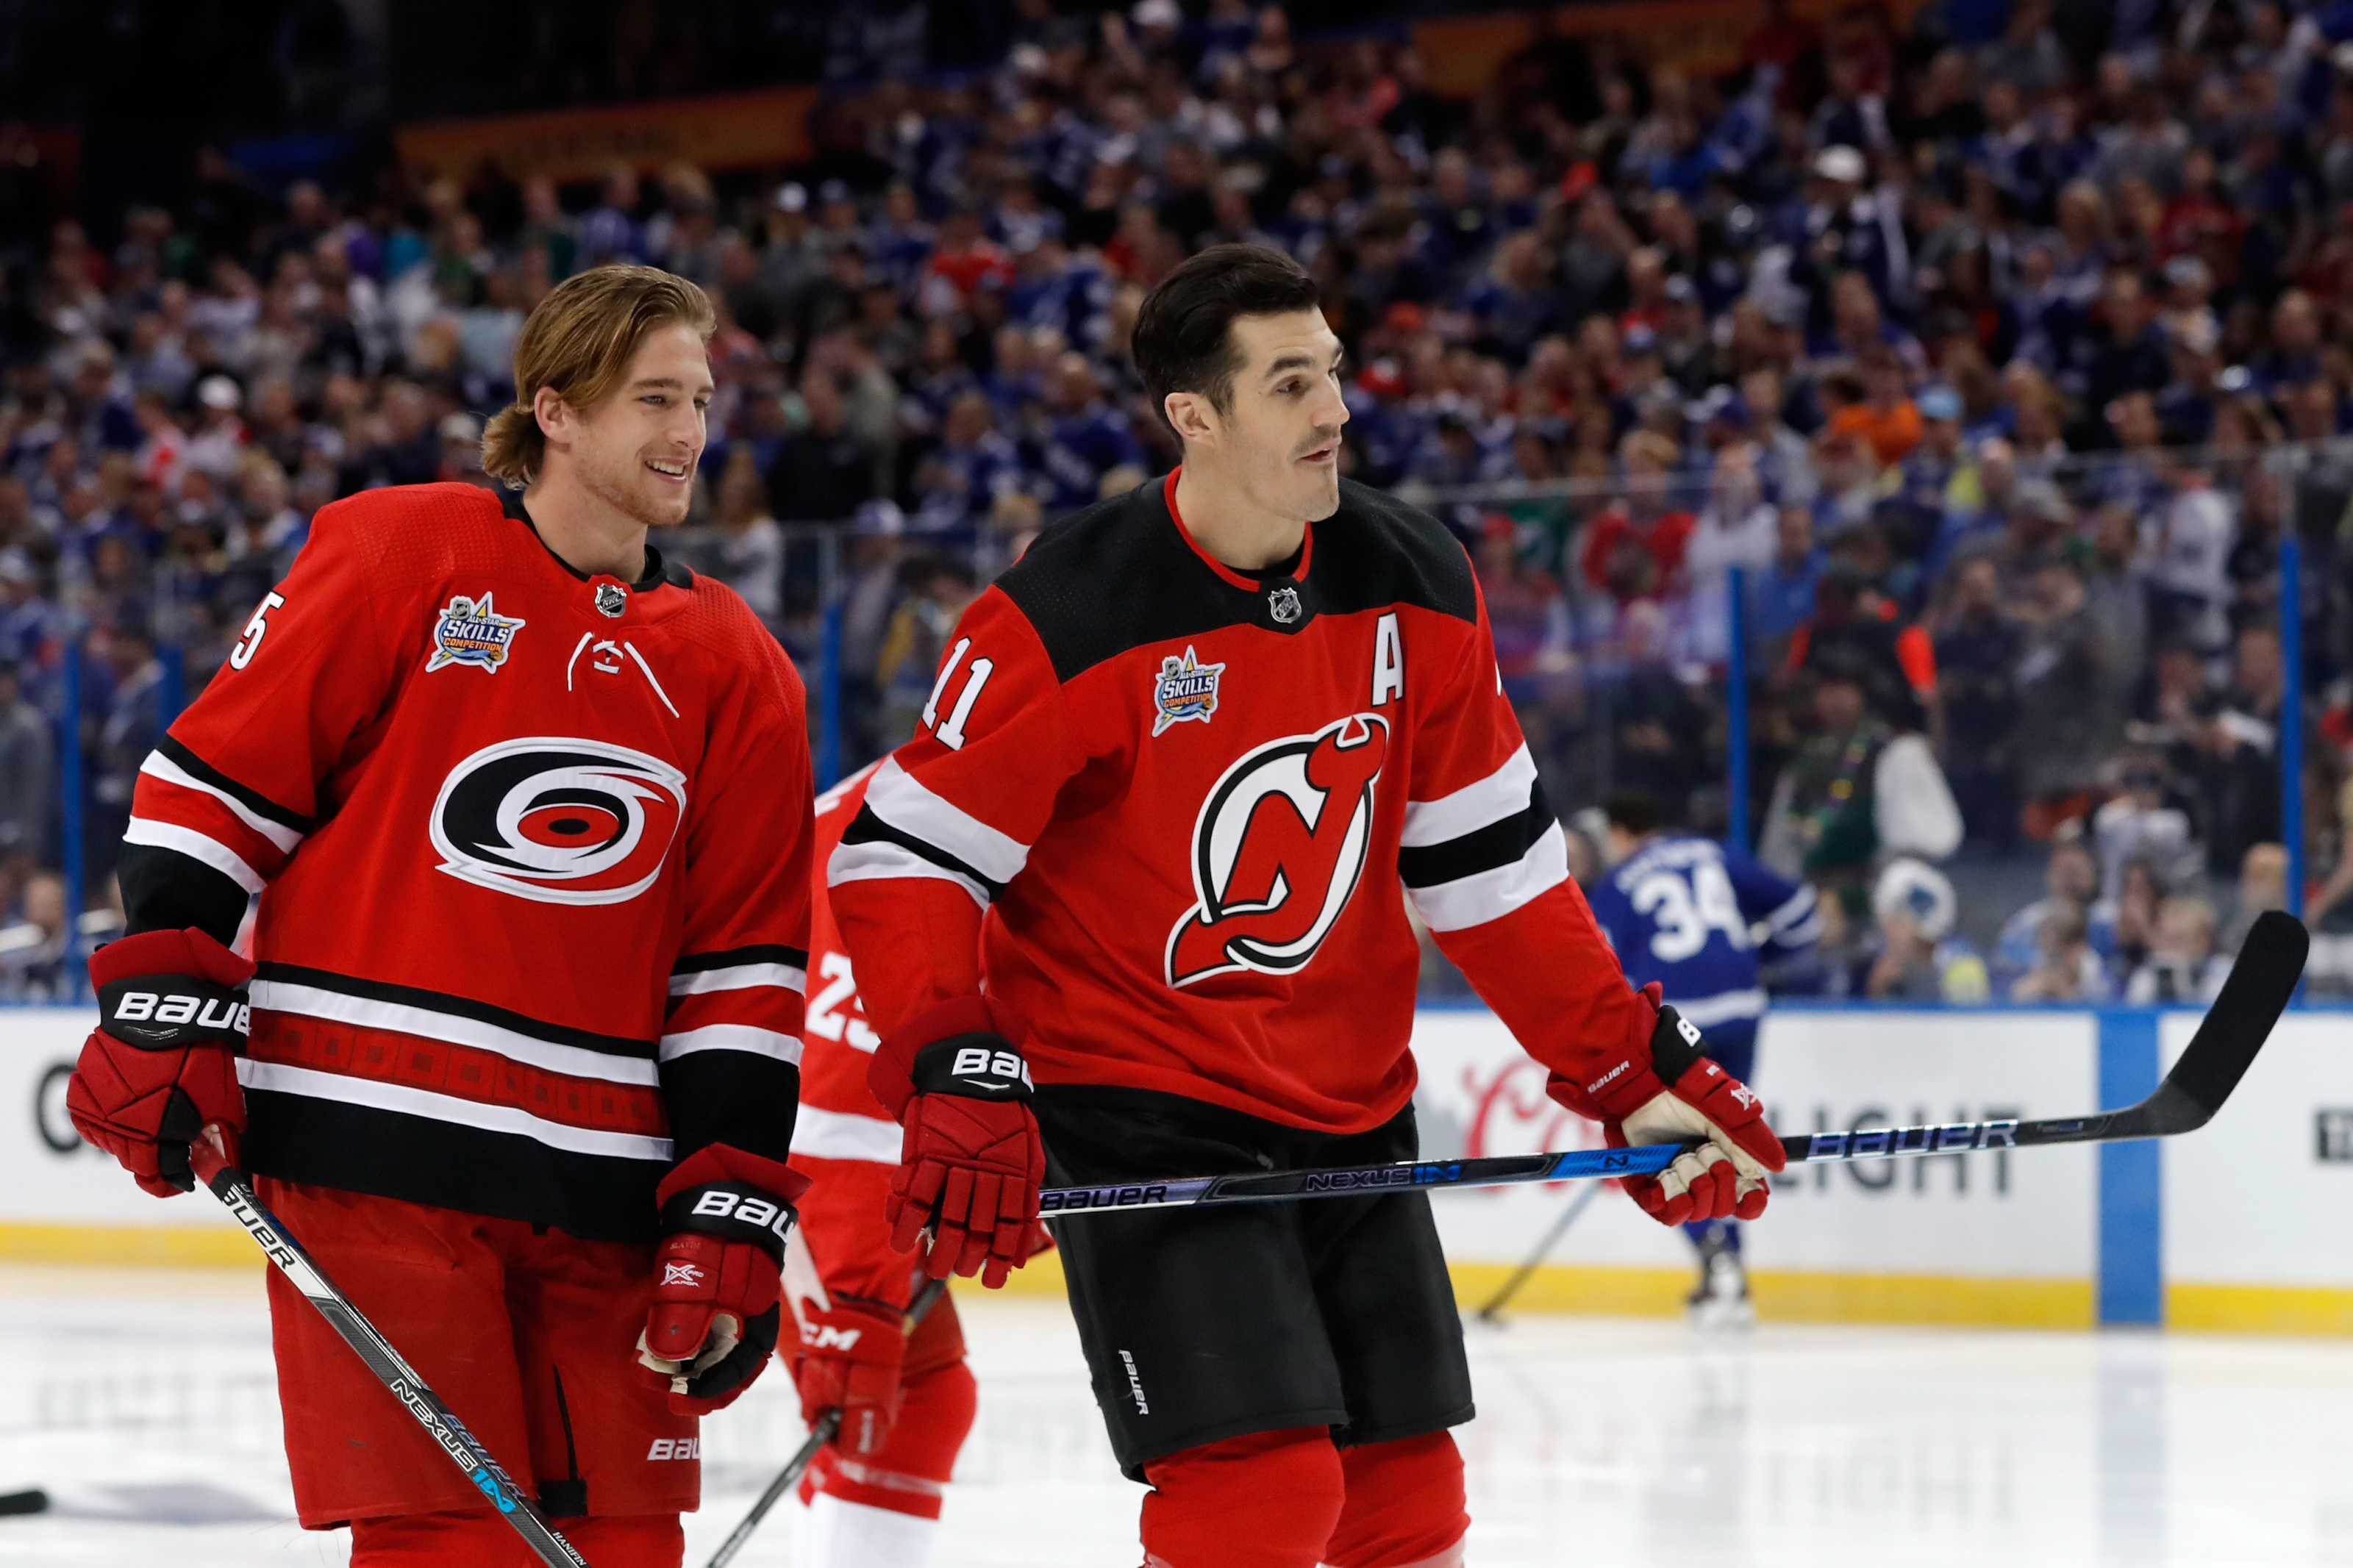 New Jersey Devils Cracked Carolina Hurricanes in 8-4 Blowout in Game 3 -  All About The Jersey